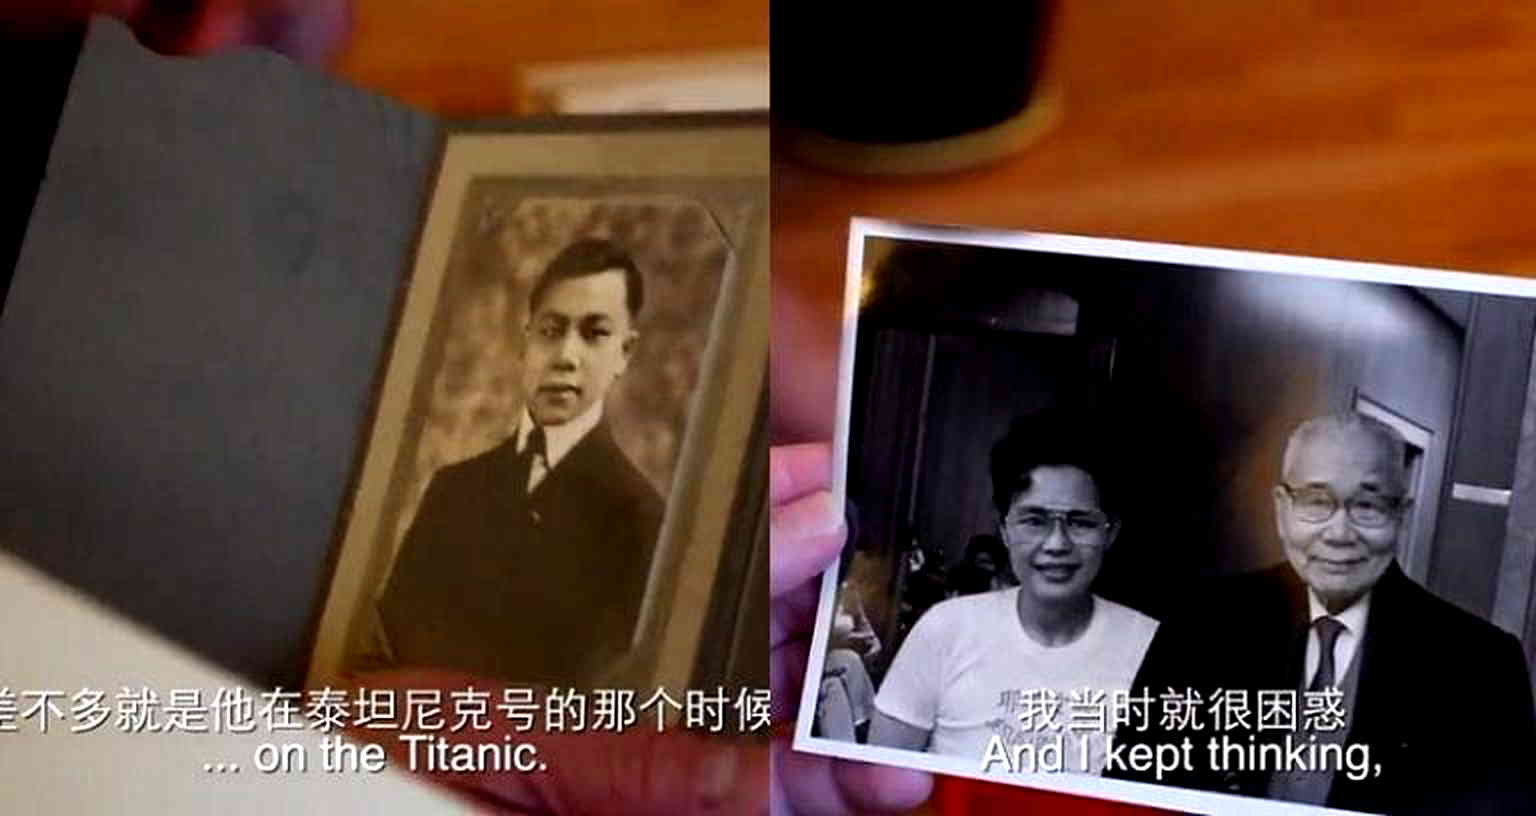 The 6 Chinese Survivors of the Titanic That U.S. History Purposely Erased